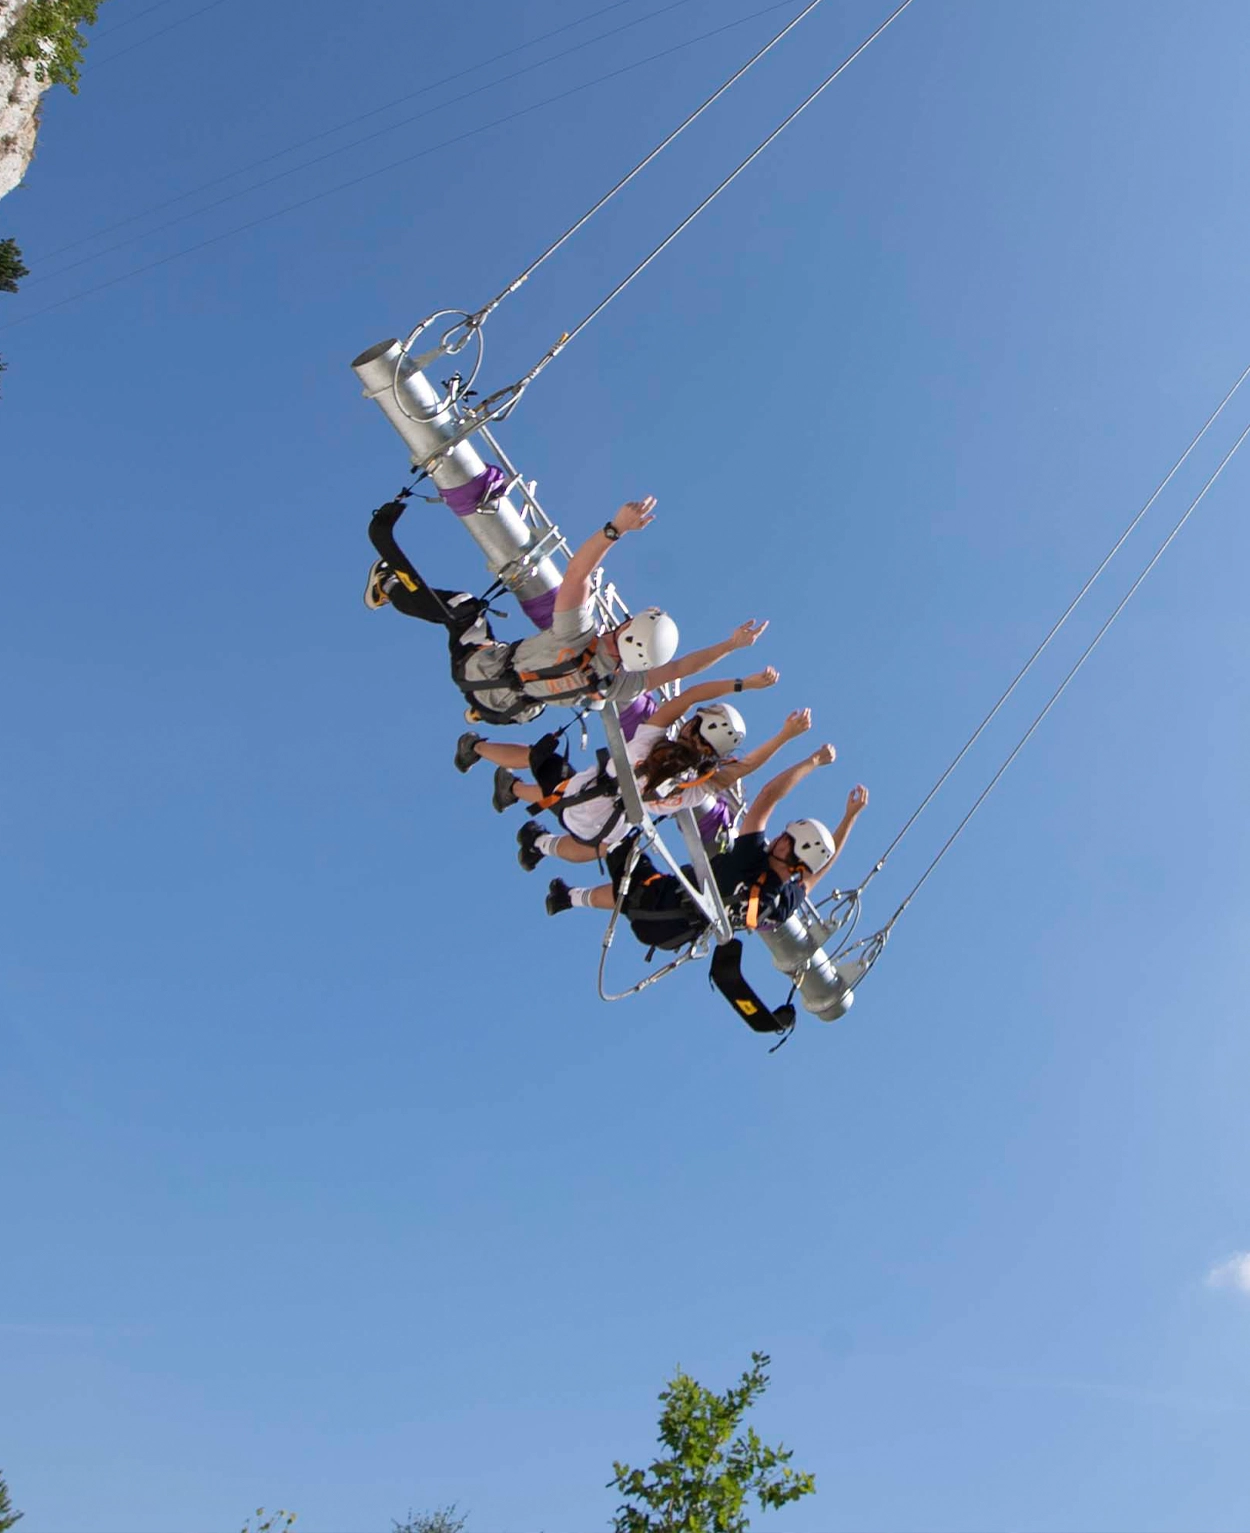 Giant swing ride, Europe's biggest at hangloose